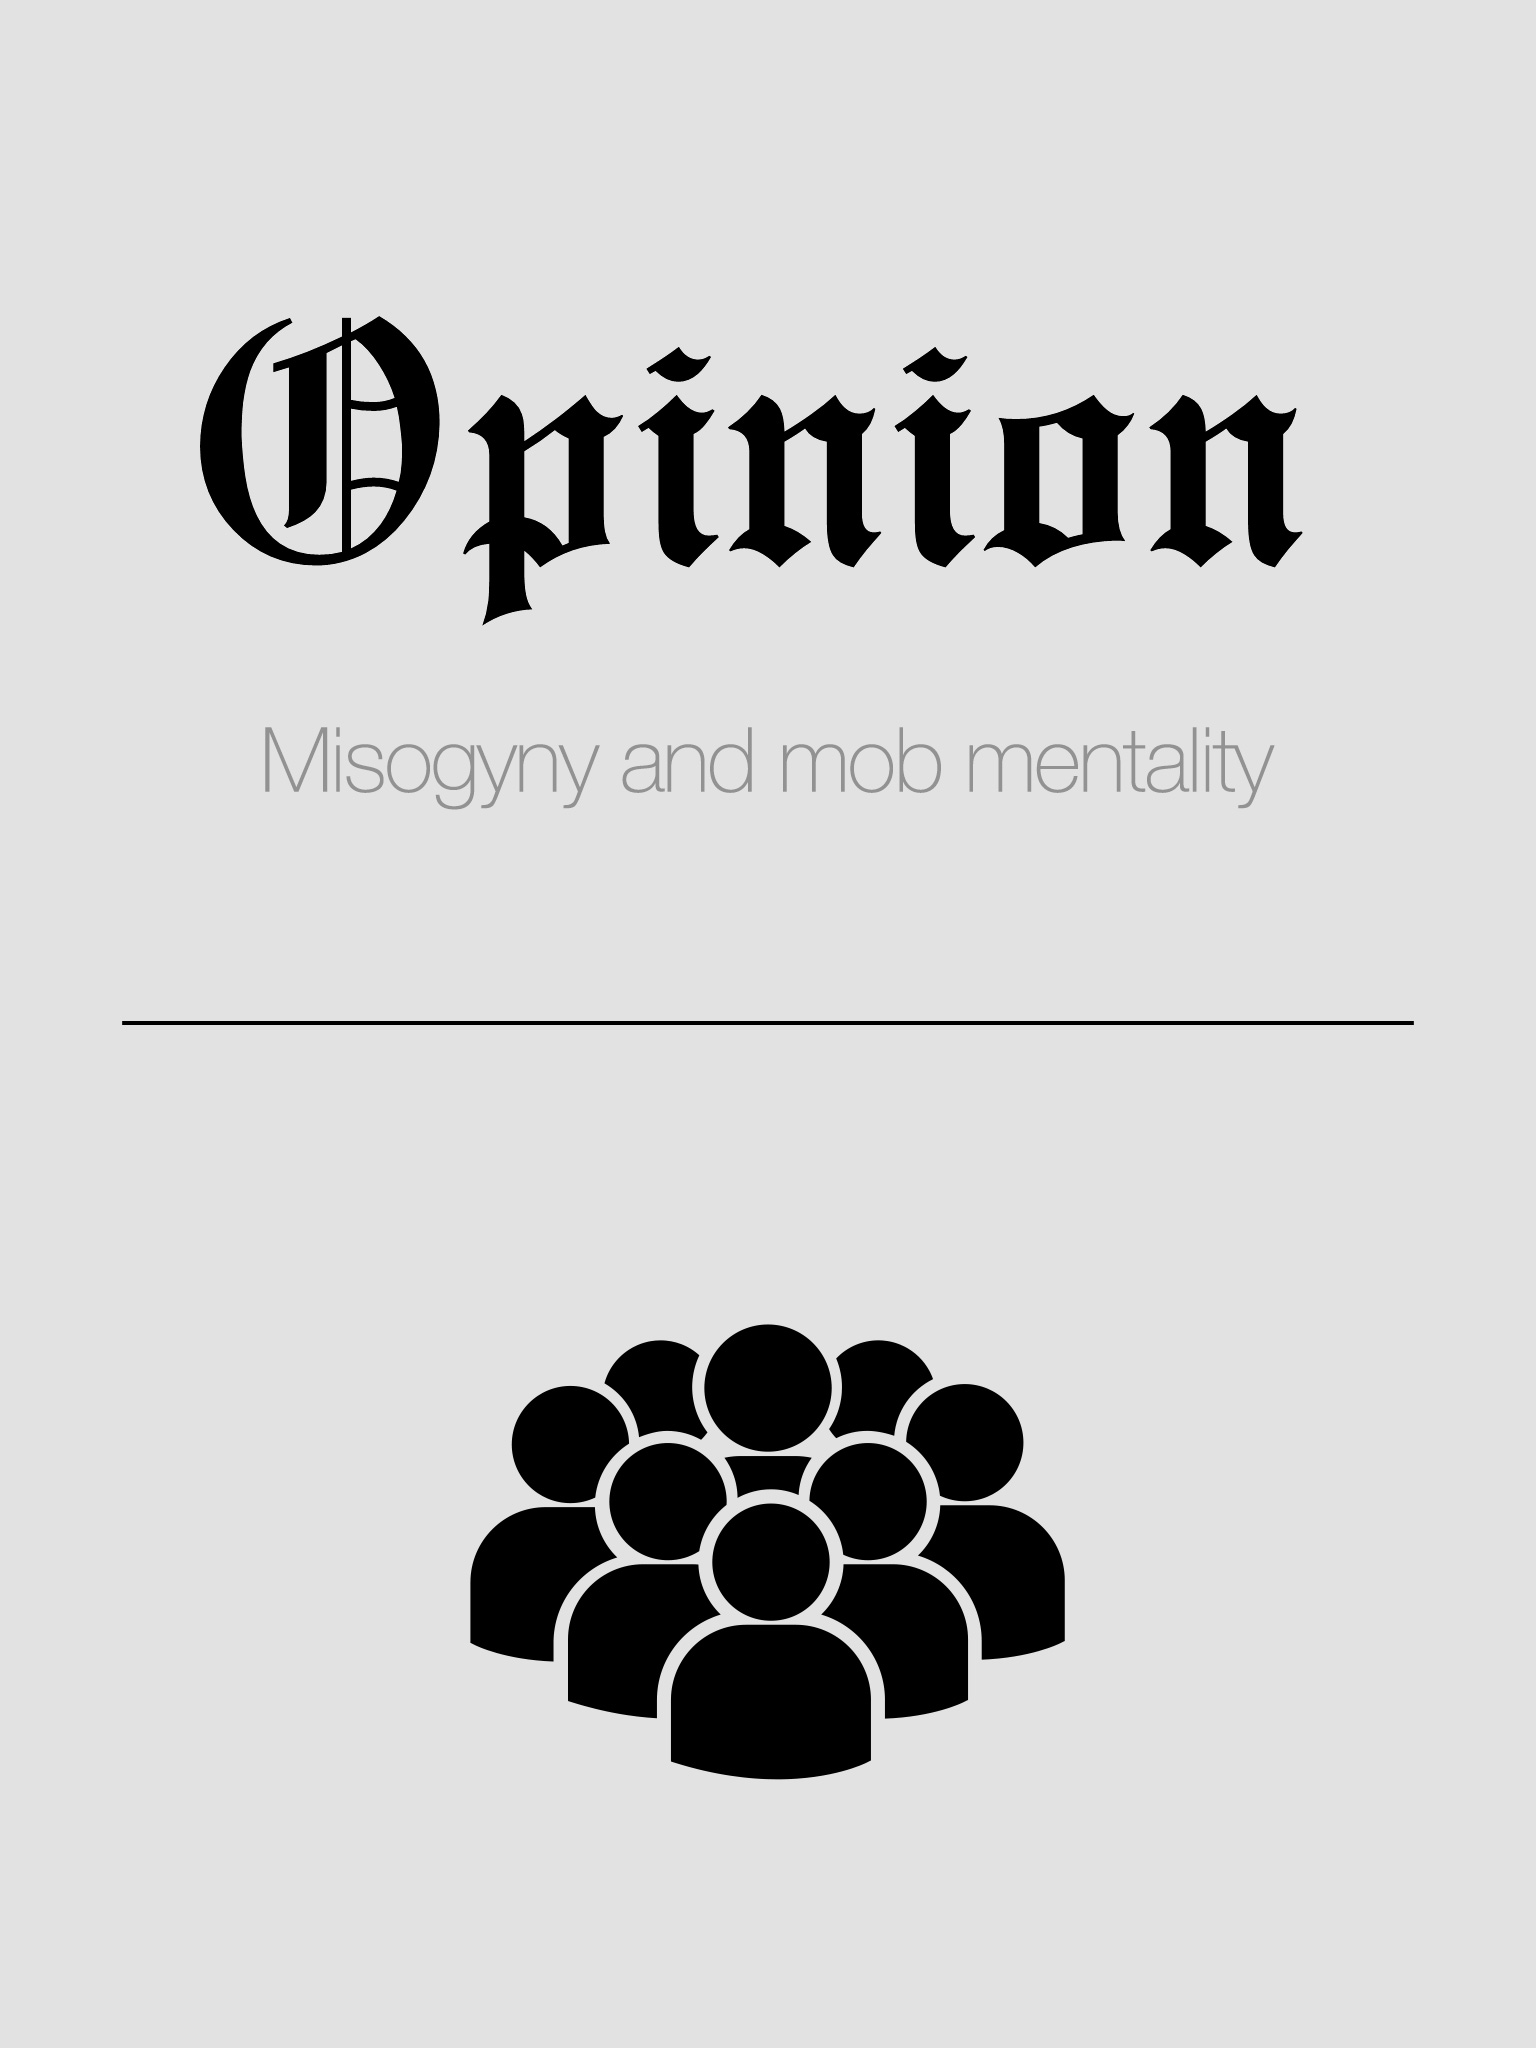 Opinion: Misogyny and mob mentality